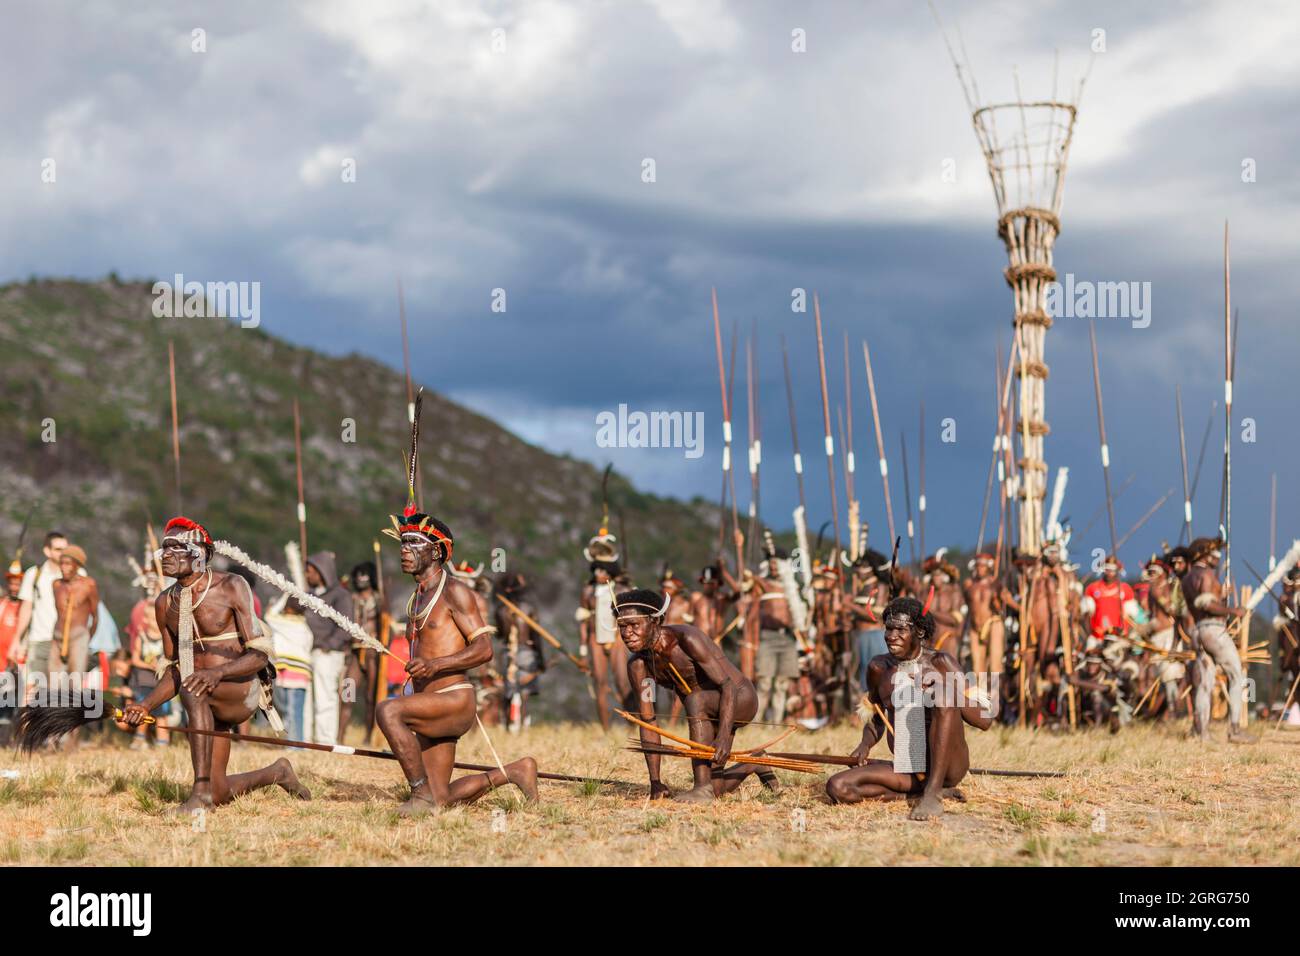 Indonesia, Papua, city of Wamena, armed members of the Dani tribe re-enacting a tribal war scene and posing in front of a watchtower. Baliem Valley Cultural Festival, every August, tribes come together to perform ancestral war scenes, parade and dance in traditional clothes Stock Photo